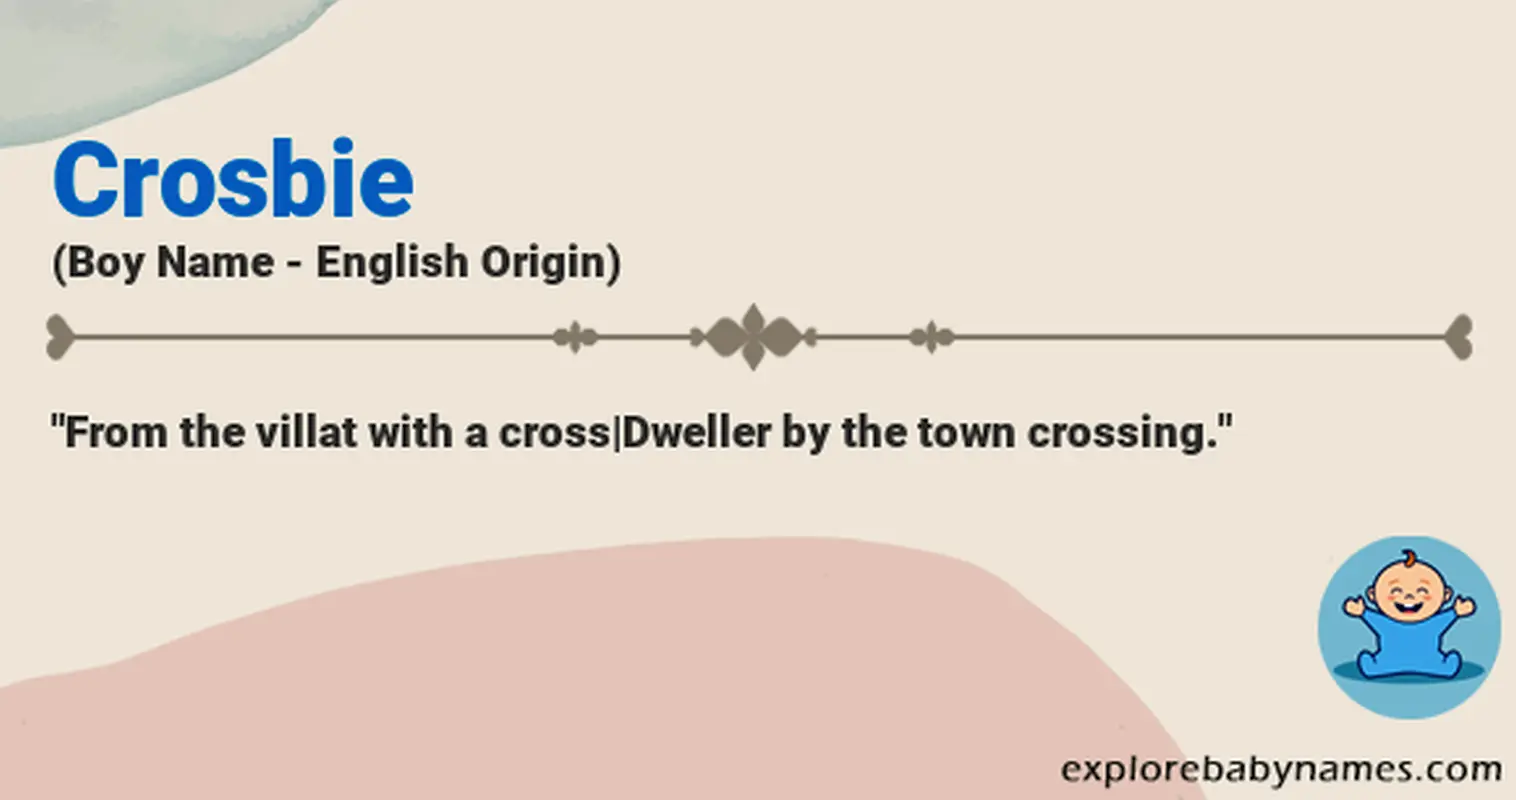 Meaning of Crosbie